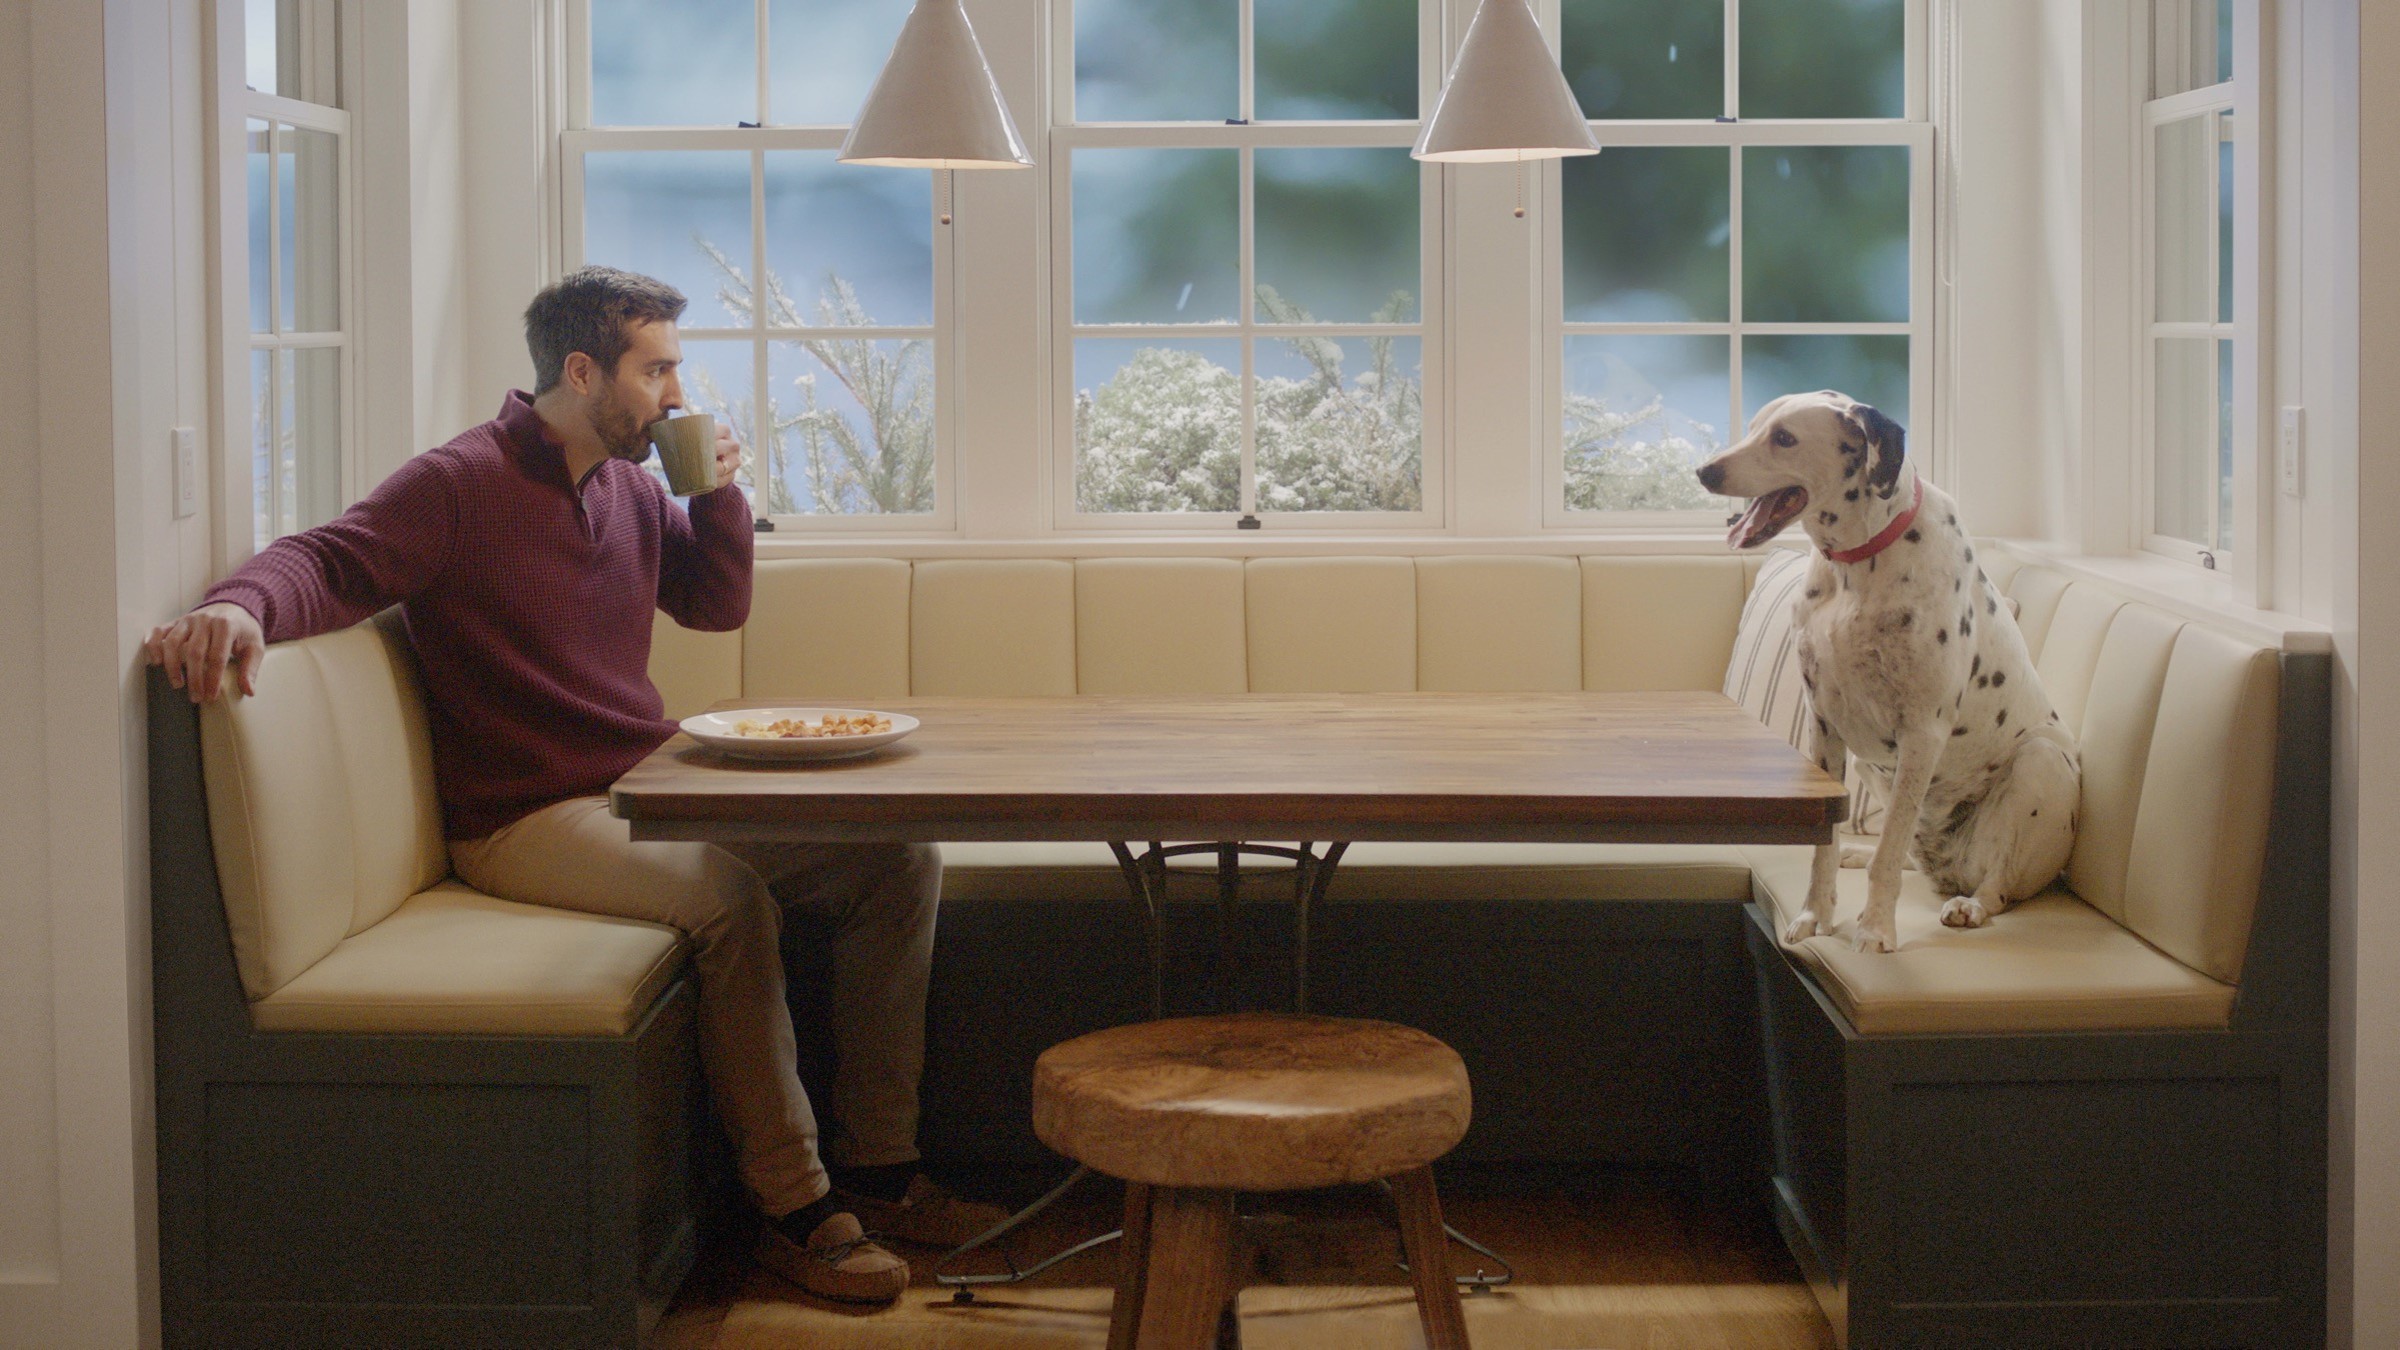 Man at kitchen table with friendly dog